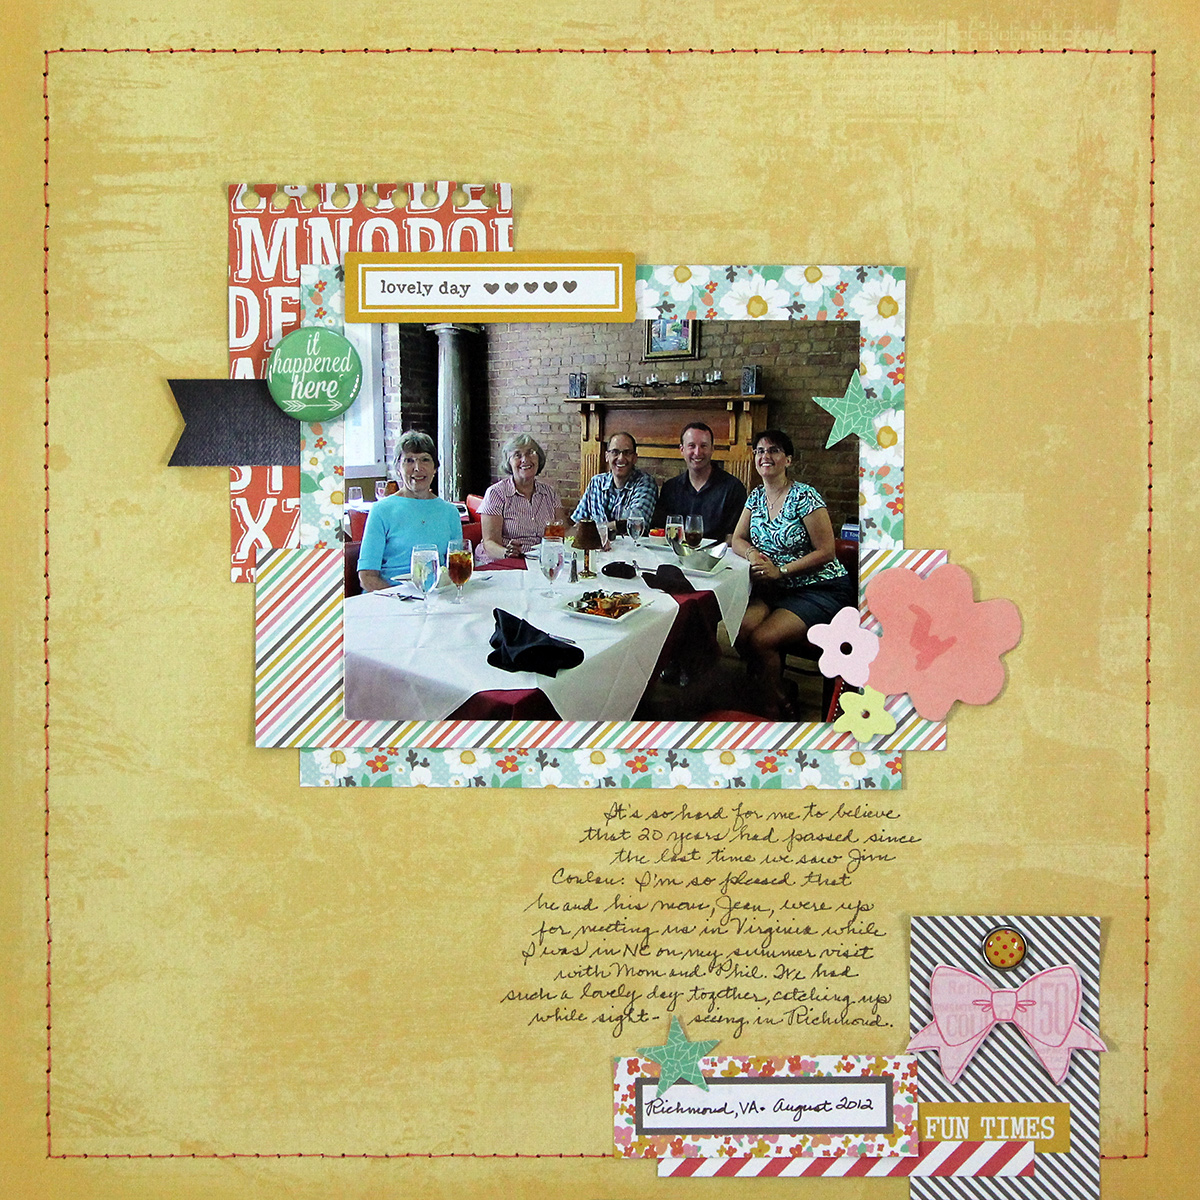 Fun Times is a one-photo scrapbook page created using products from Chickaniddy Crafts.